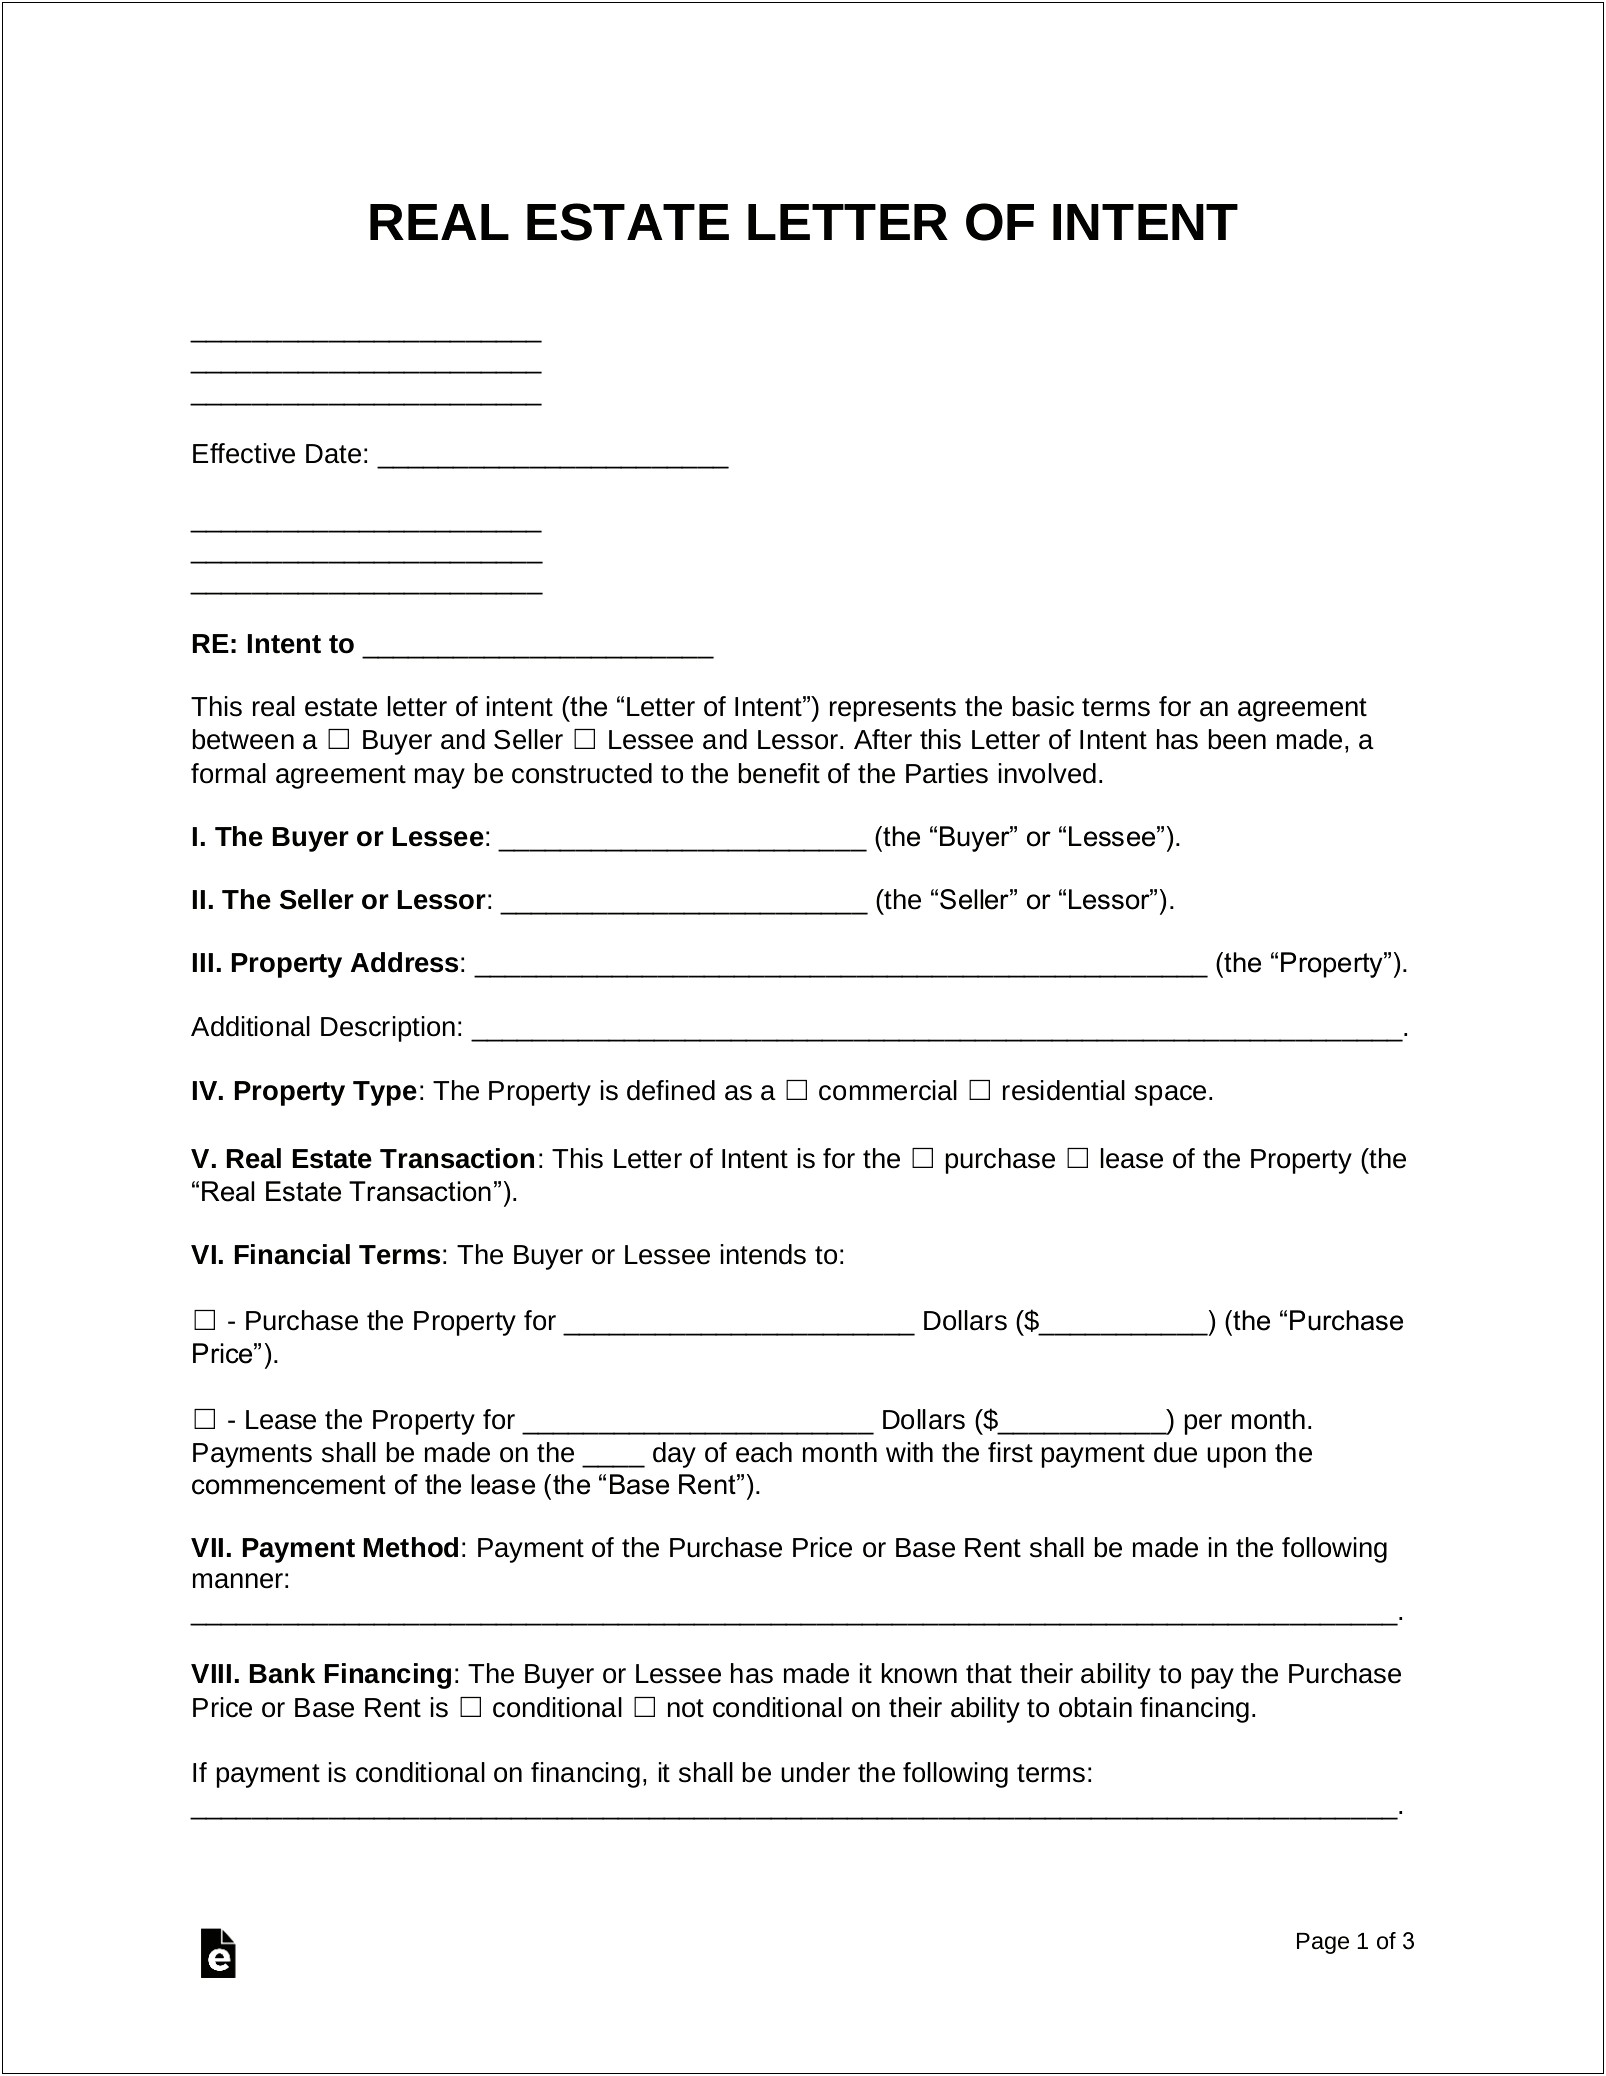 Real Estate Letter Of Intent Free Template